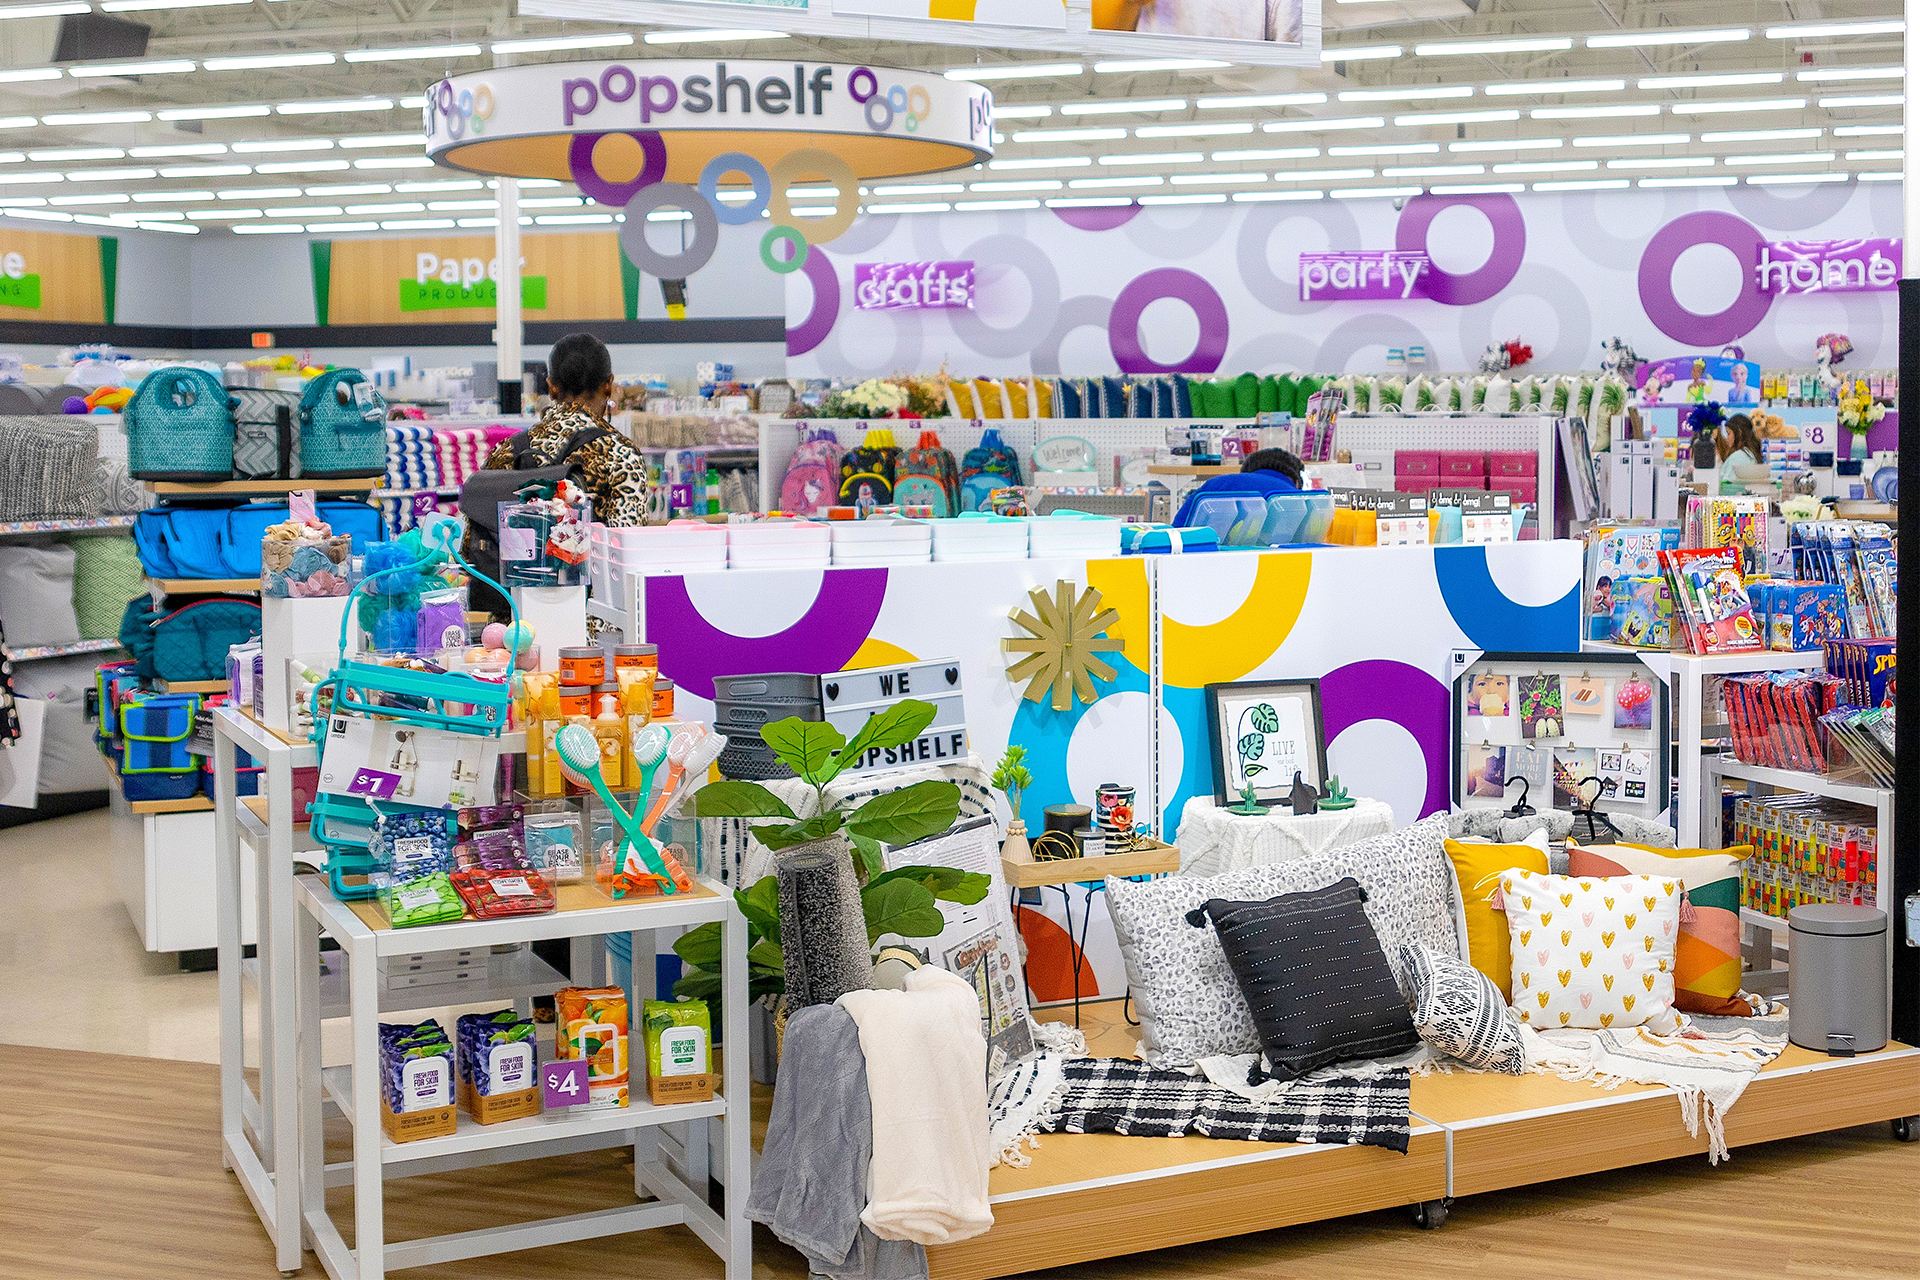 Dollar General to open 1,000 Popshelf stores, aimed at wealthier shoppers